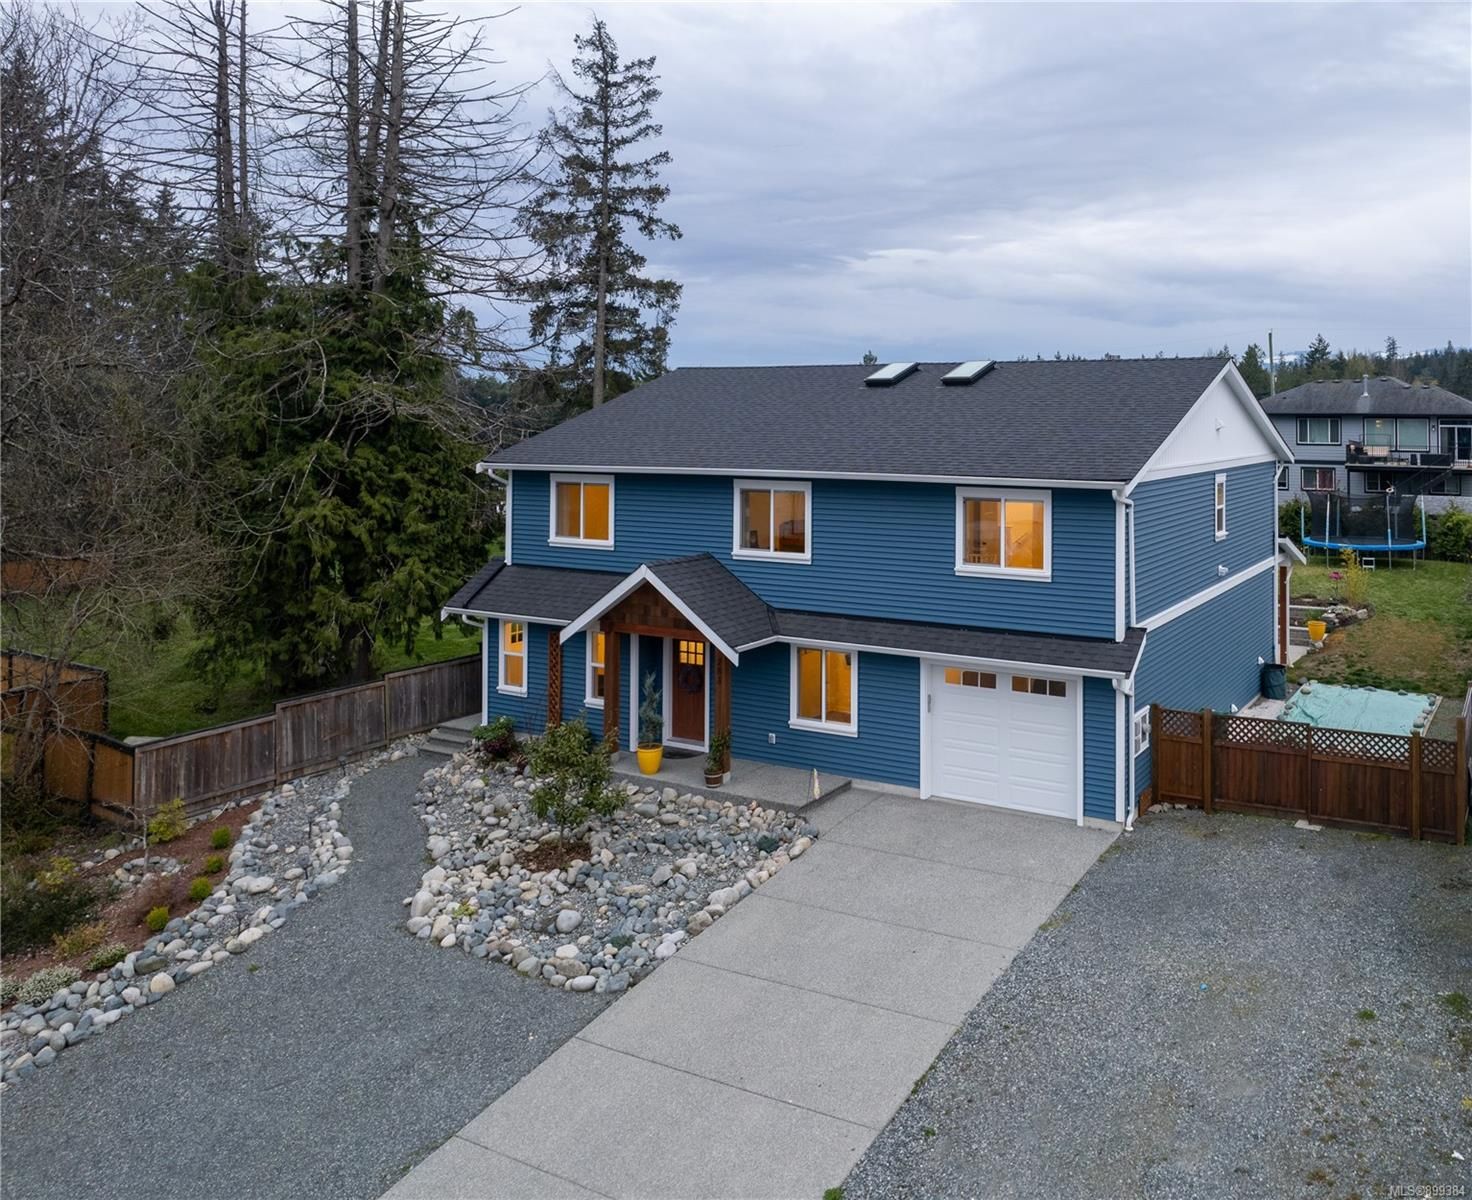 I have sold a property at 283 Ryan Rd in Nanaimo
